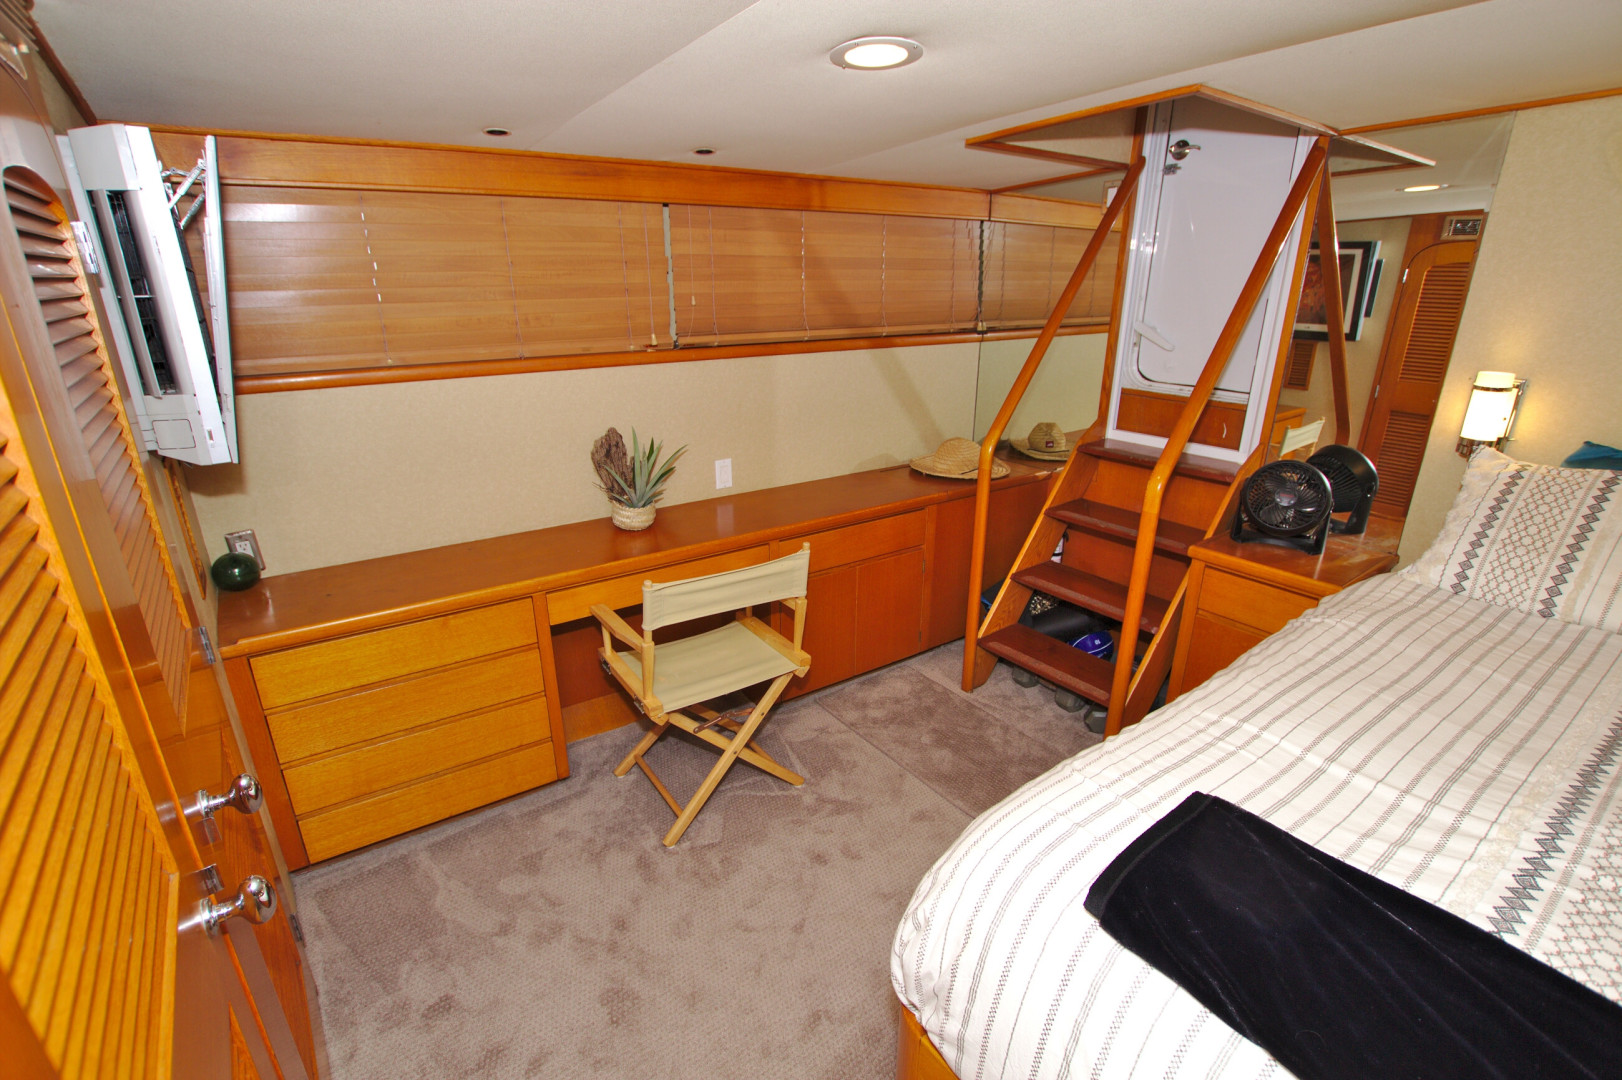 1986 86' Stephens Enclosed Pilothouse MY